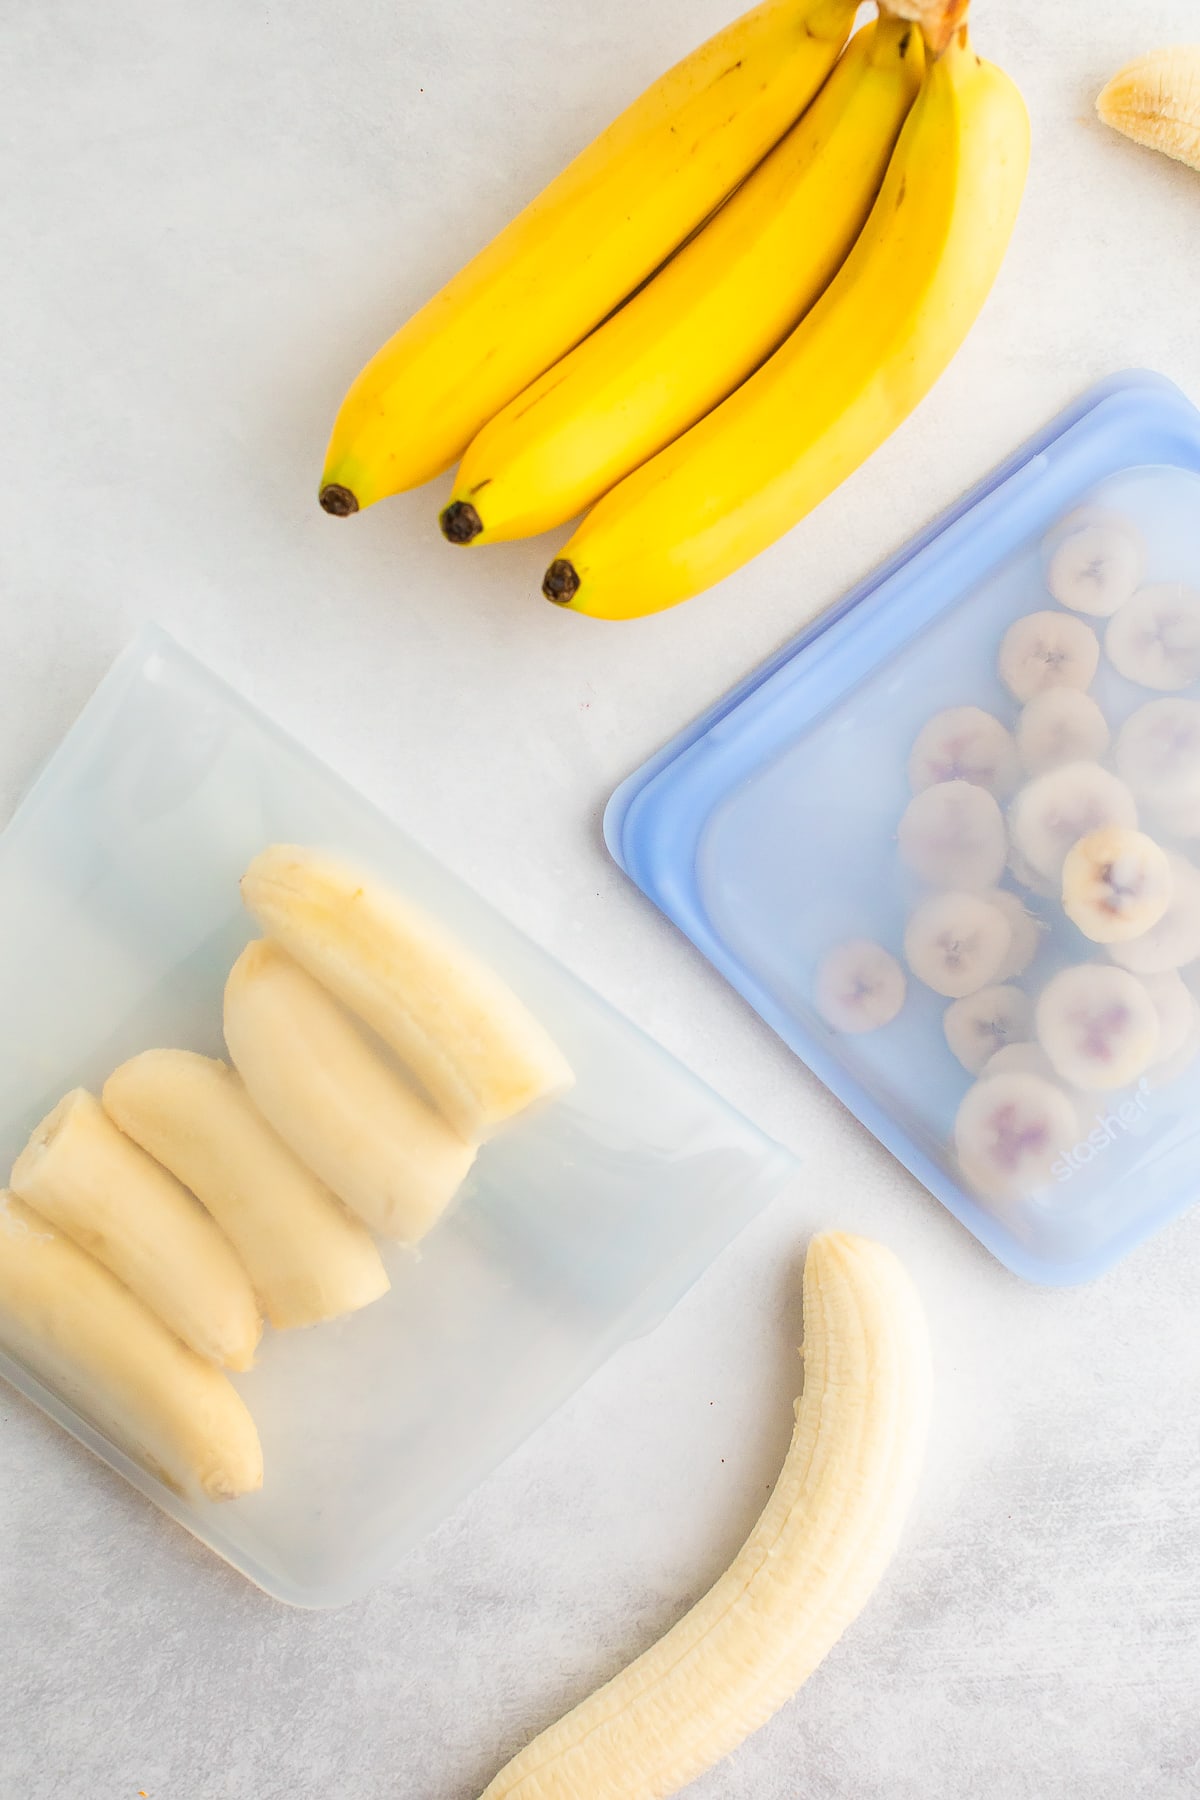 https://www.eatingbirdfood.com/wp-content/uploads/2021/10/how-to-freeze-bananas-halves-and-slices.jpg